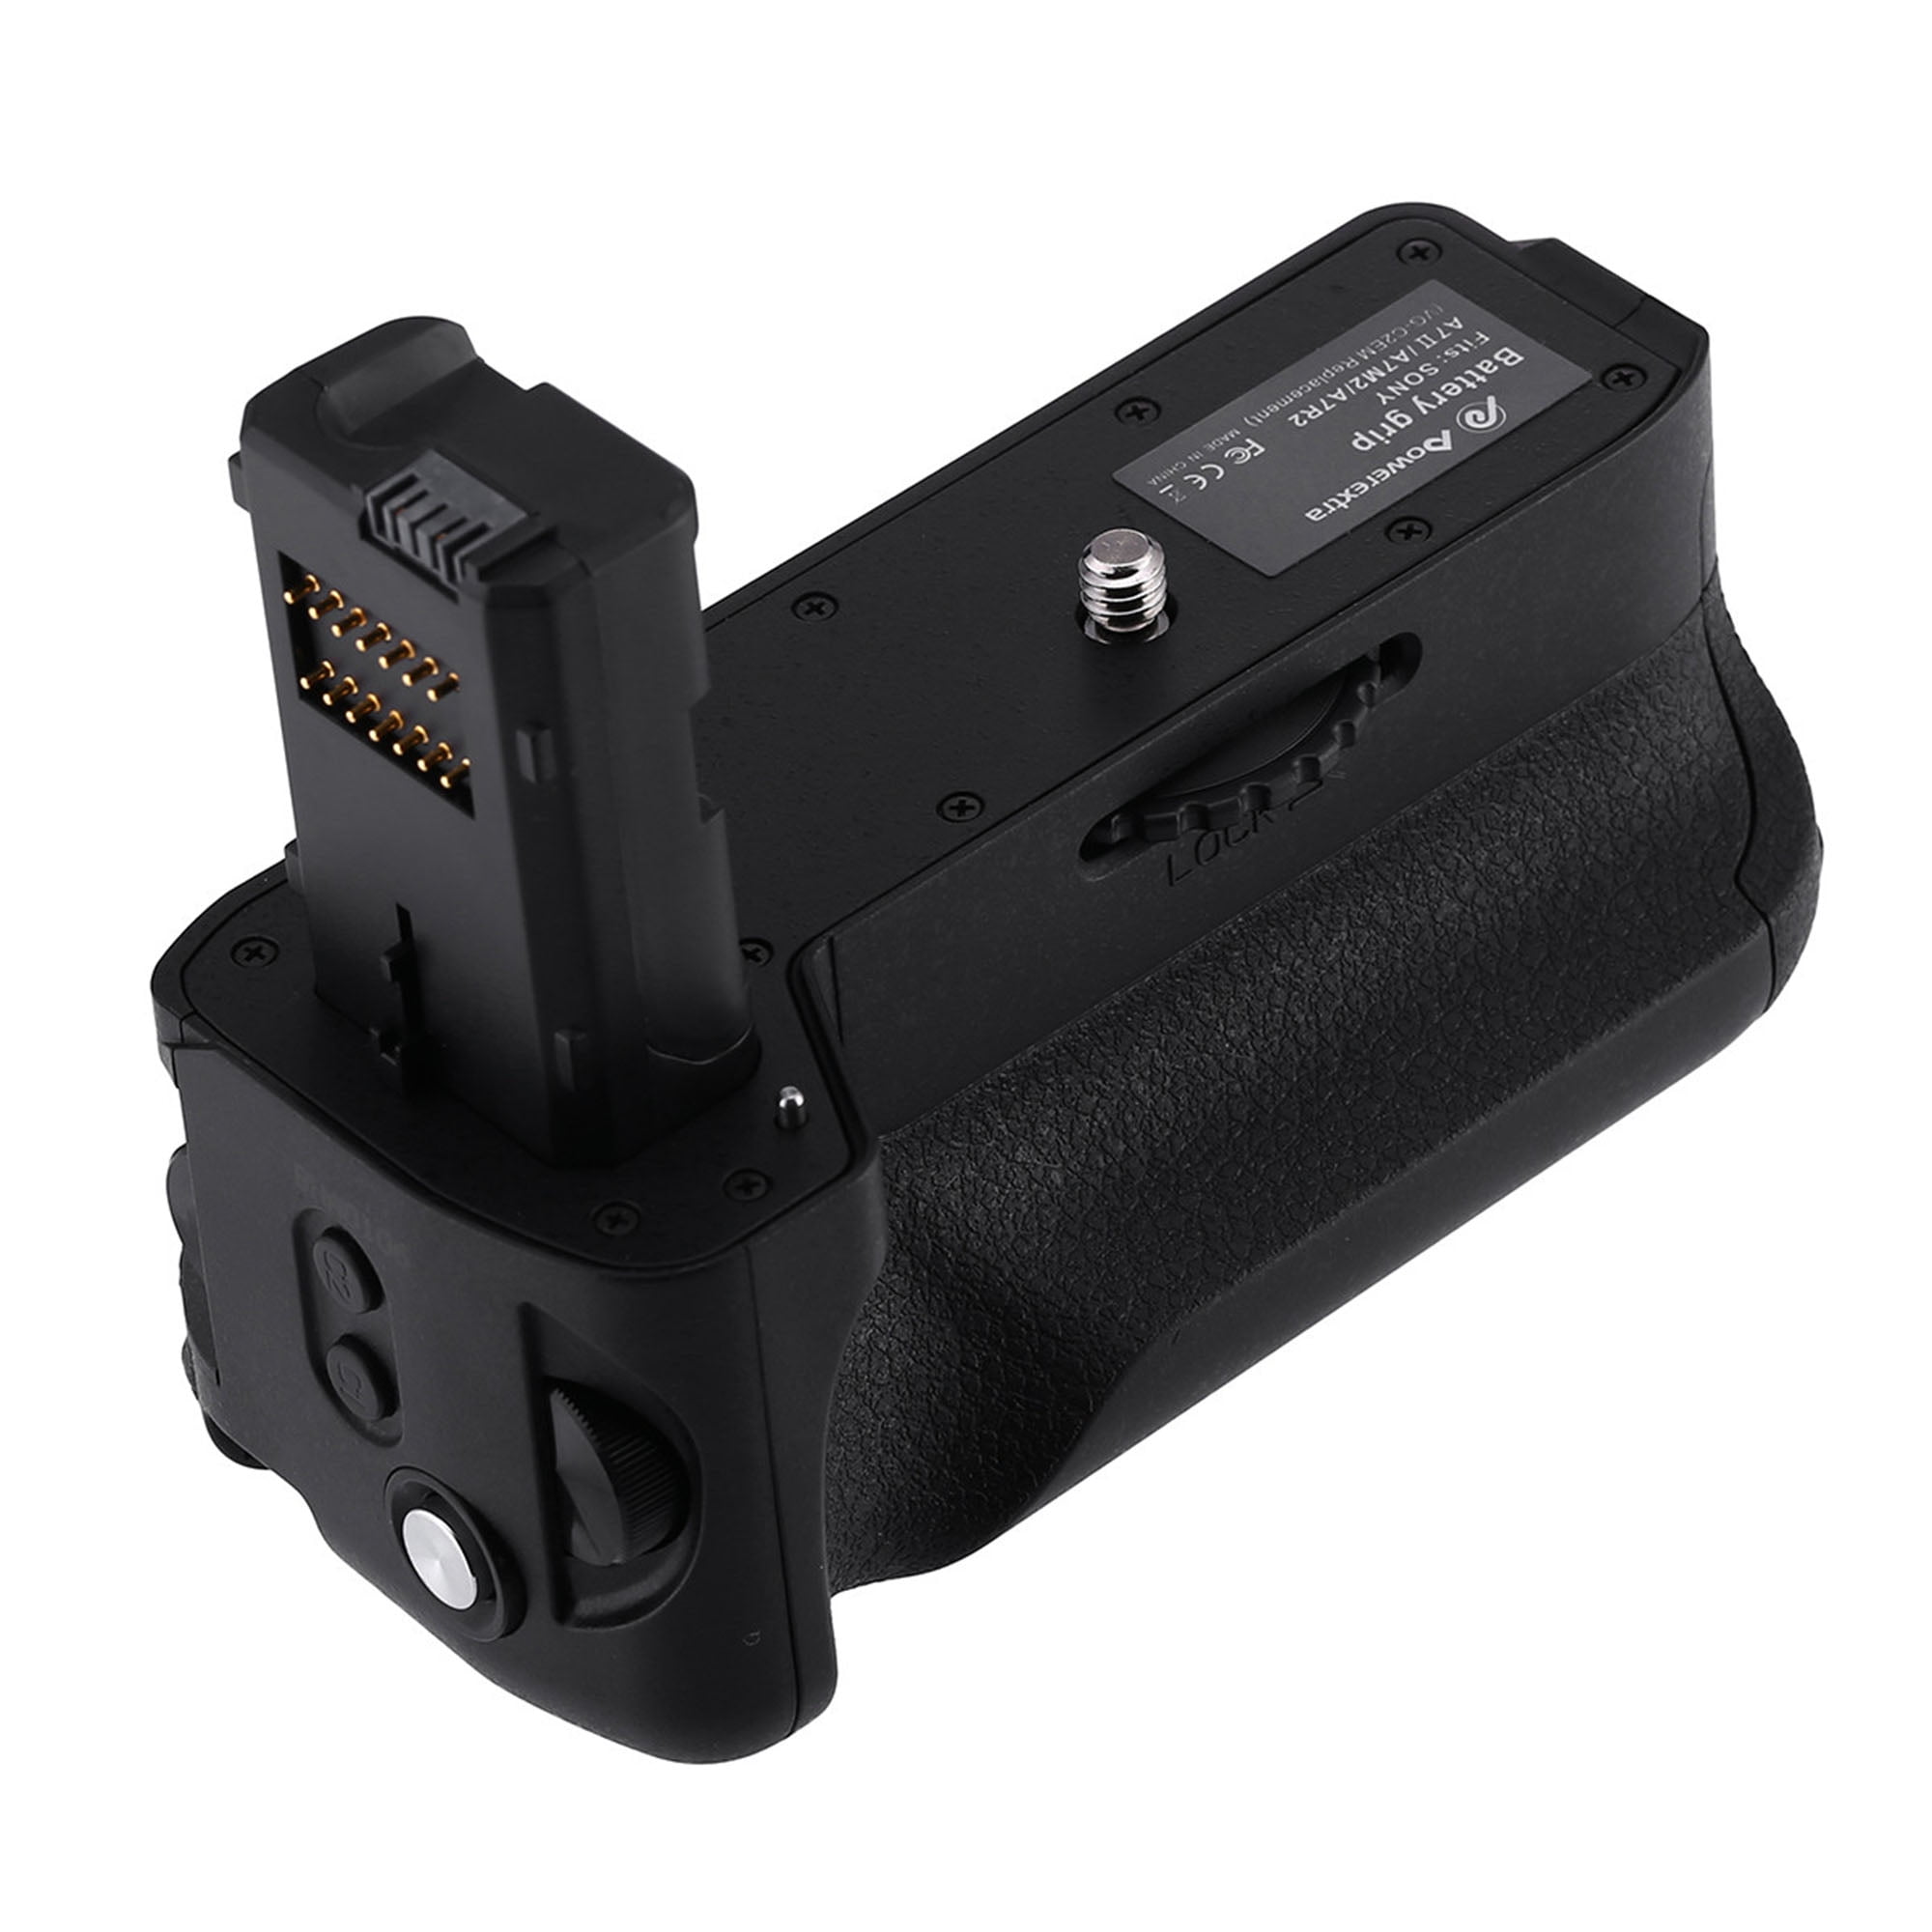 Powerextra VG-C1EM Battery Grip for Sony A7/A7S/A7R 